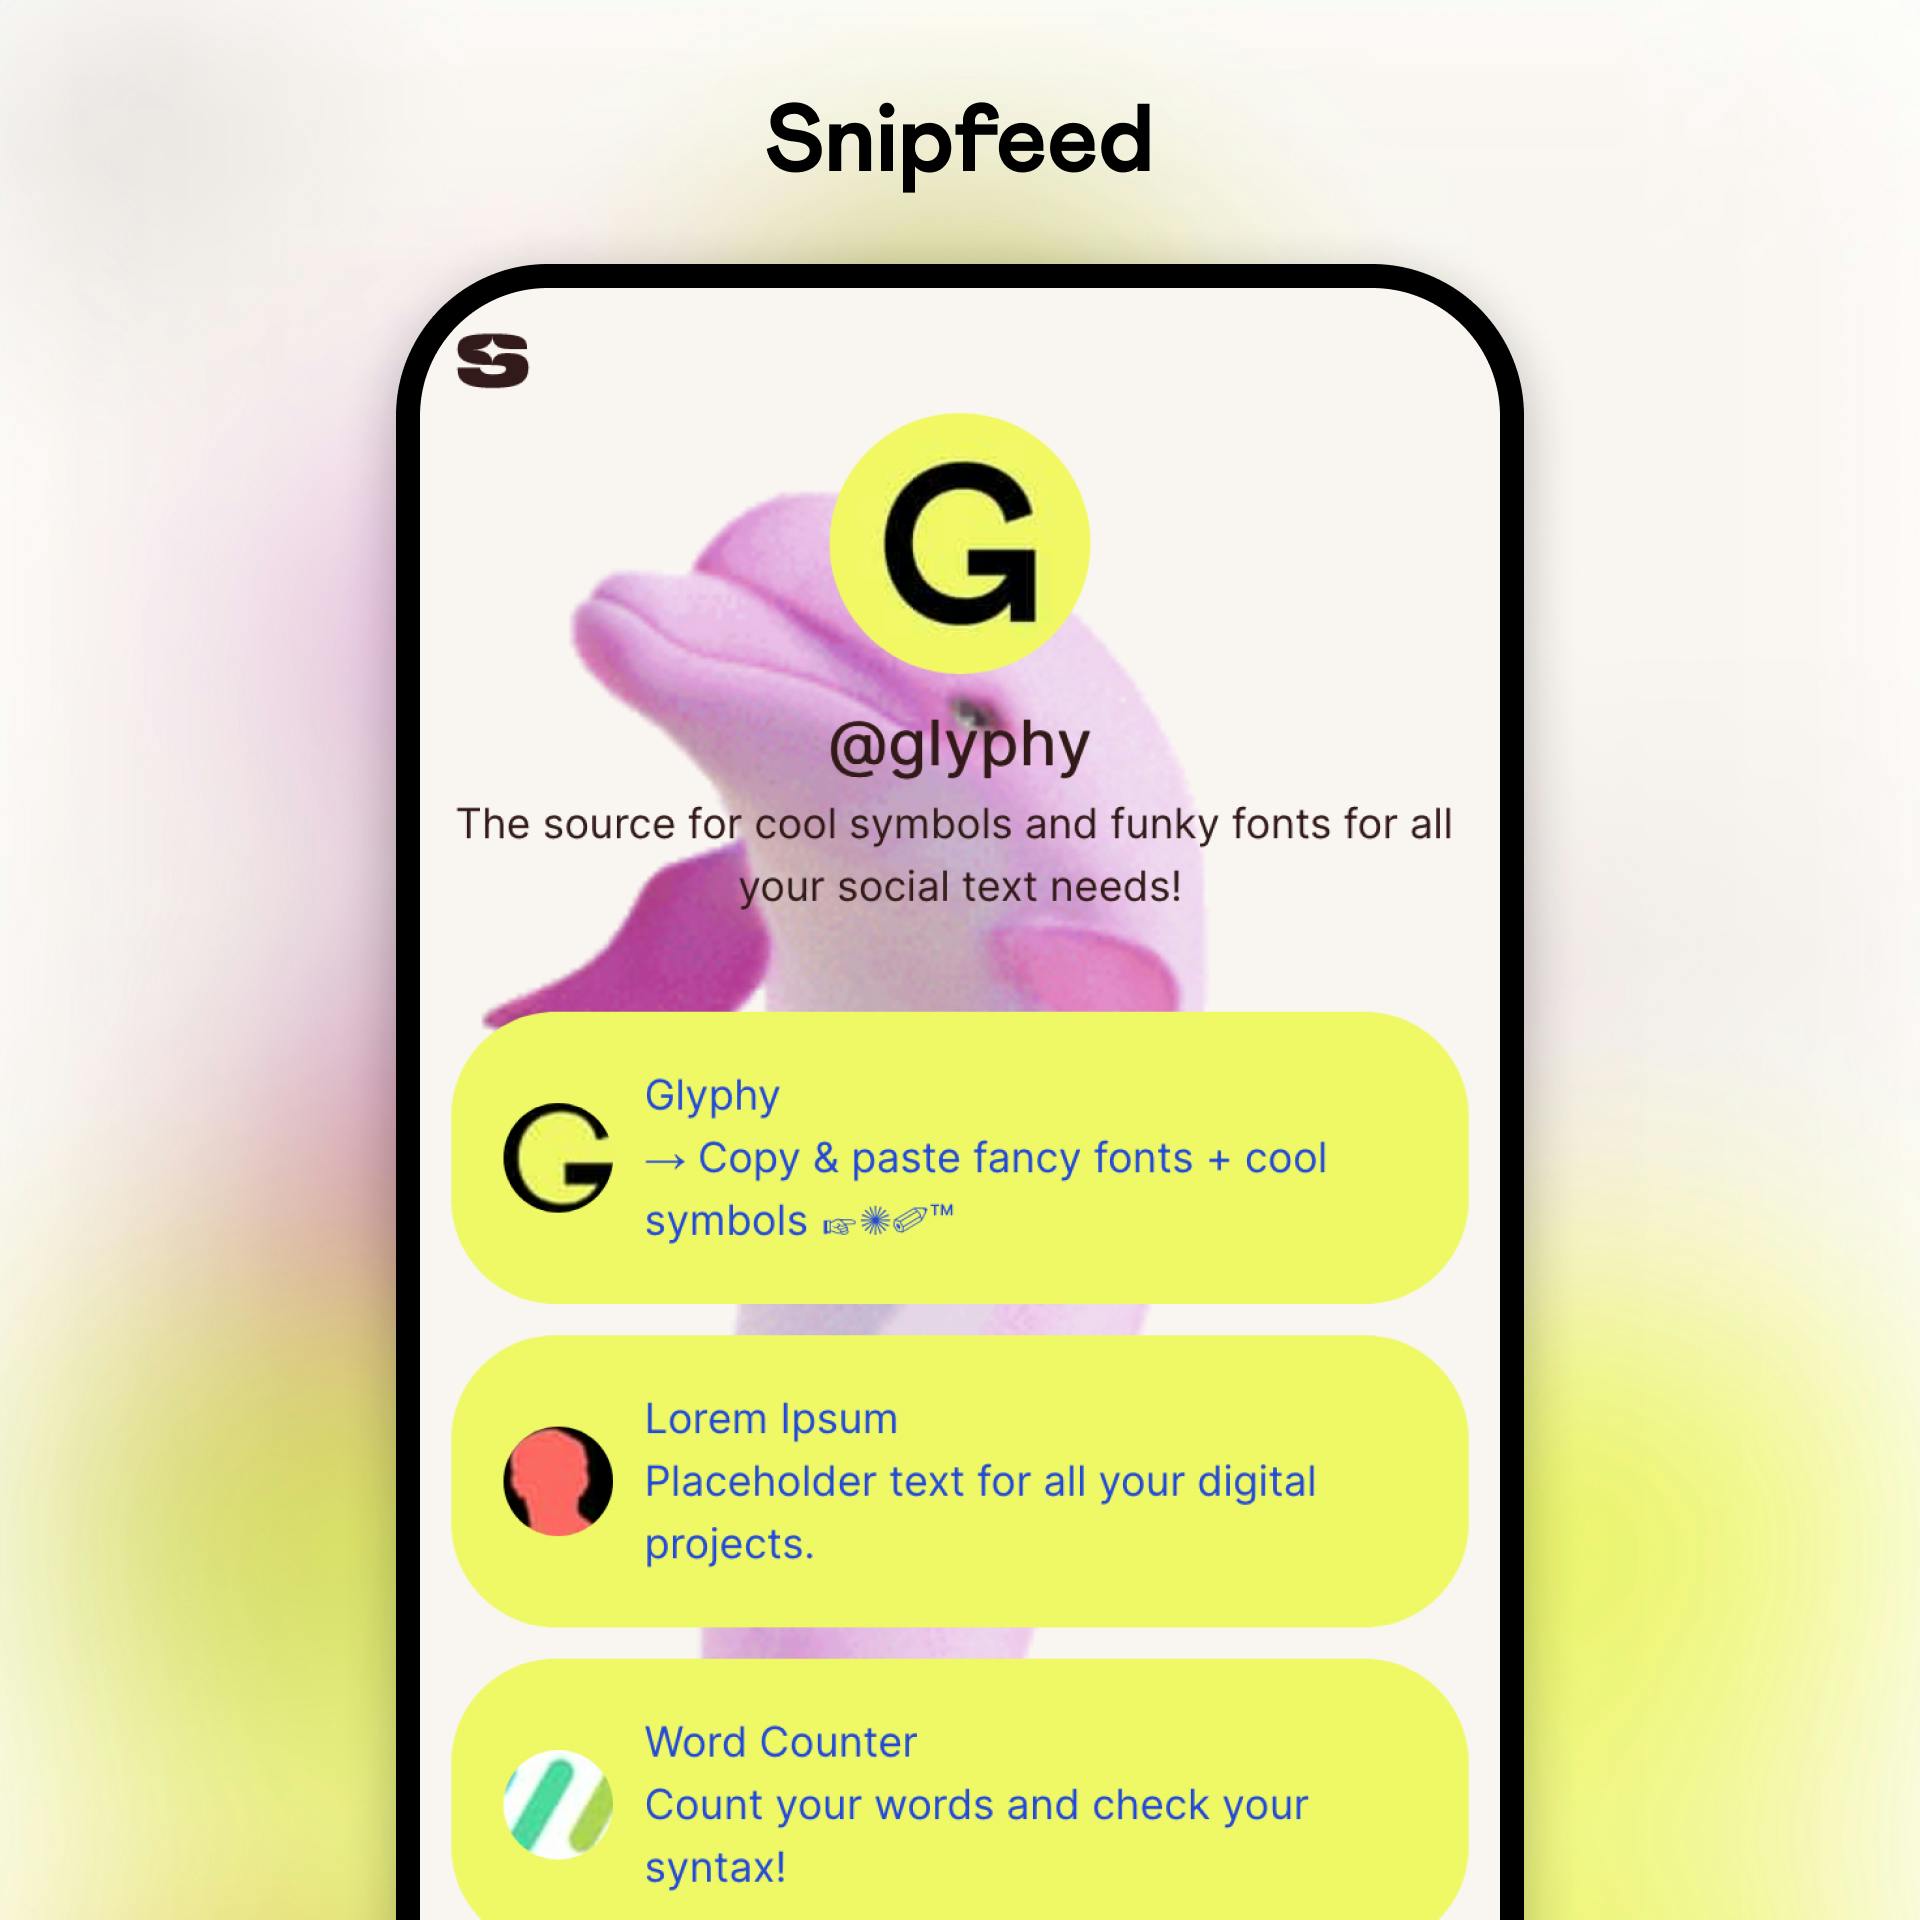 Snipfeed link in bio tool example profile on a mobile device